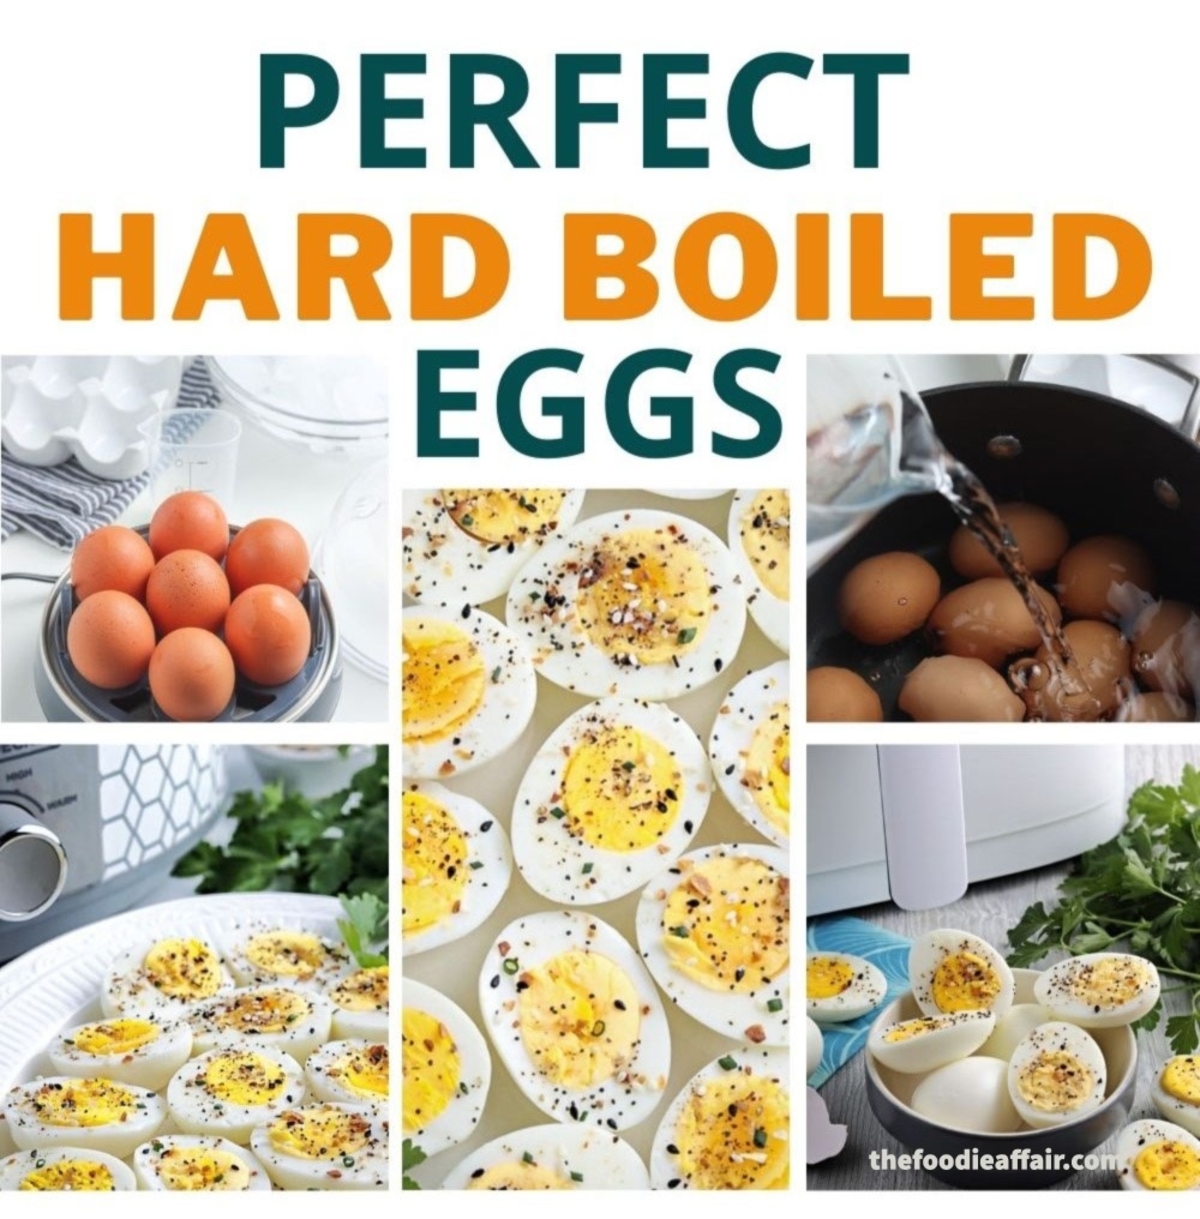 6 methods to cook perfect hard boiled eggs.